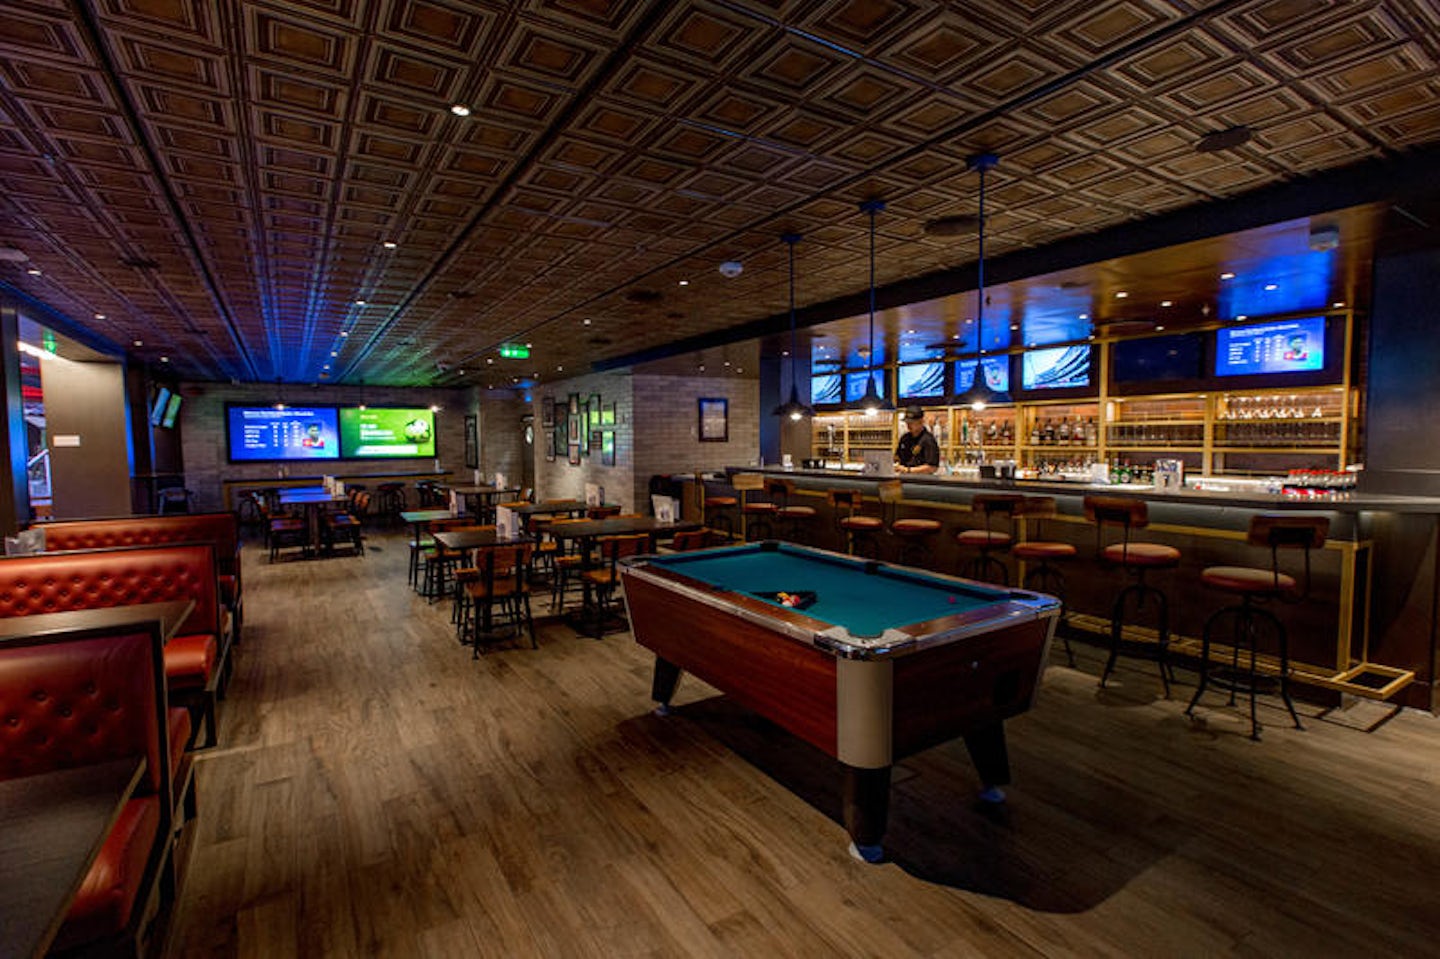 Playmakers Sports Bar & Arcade on Mariner of the Seas